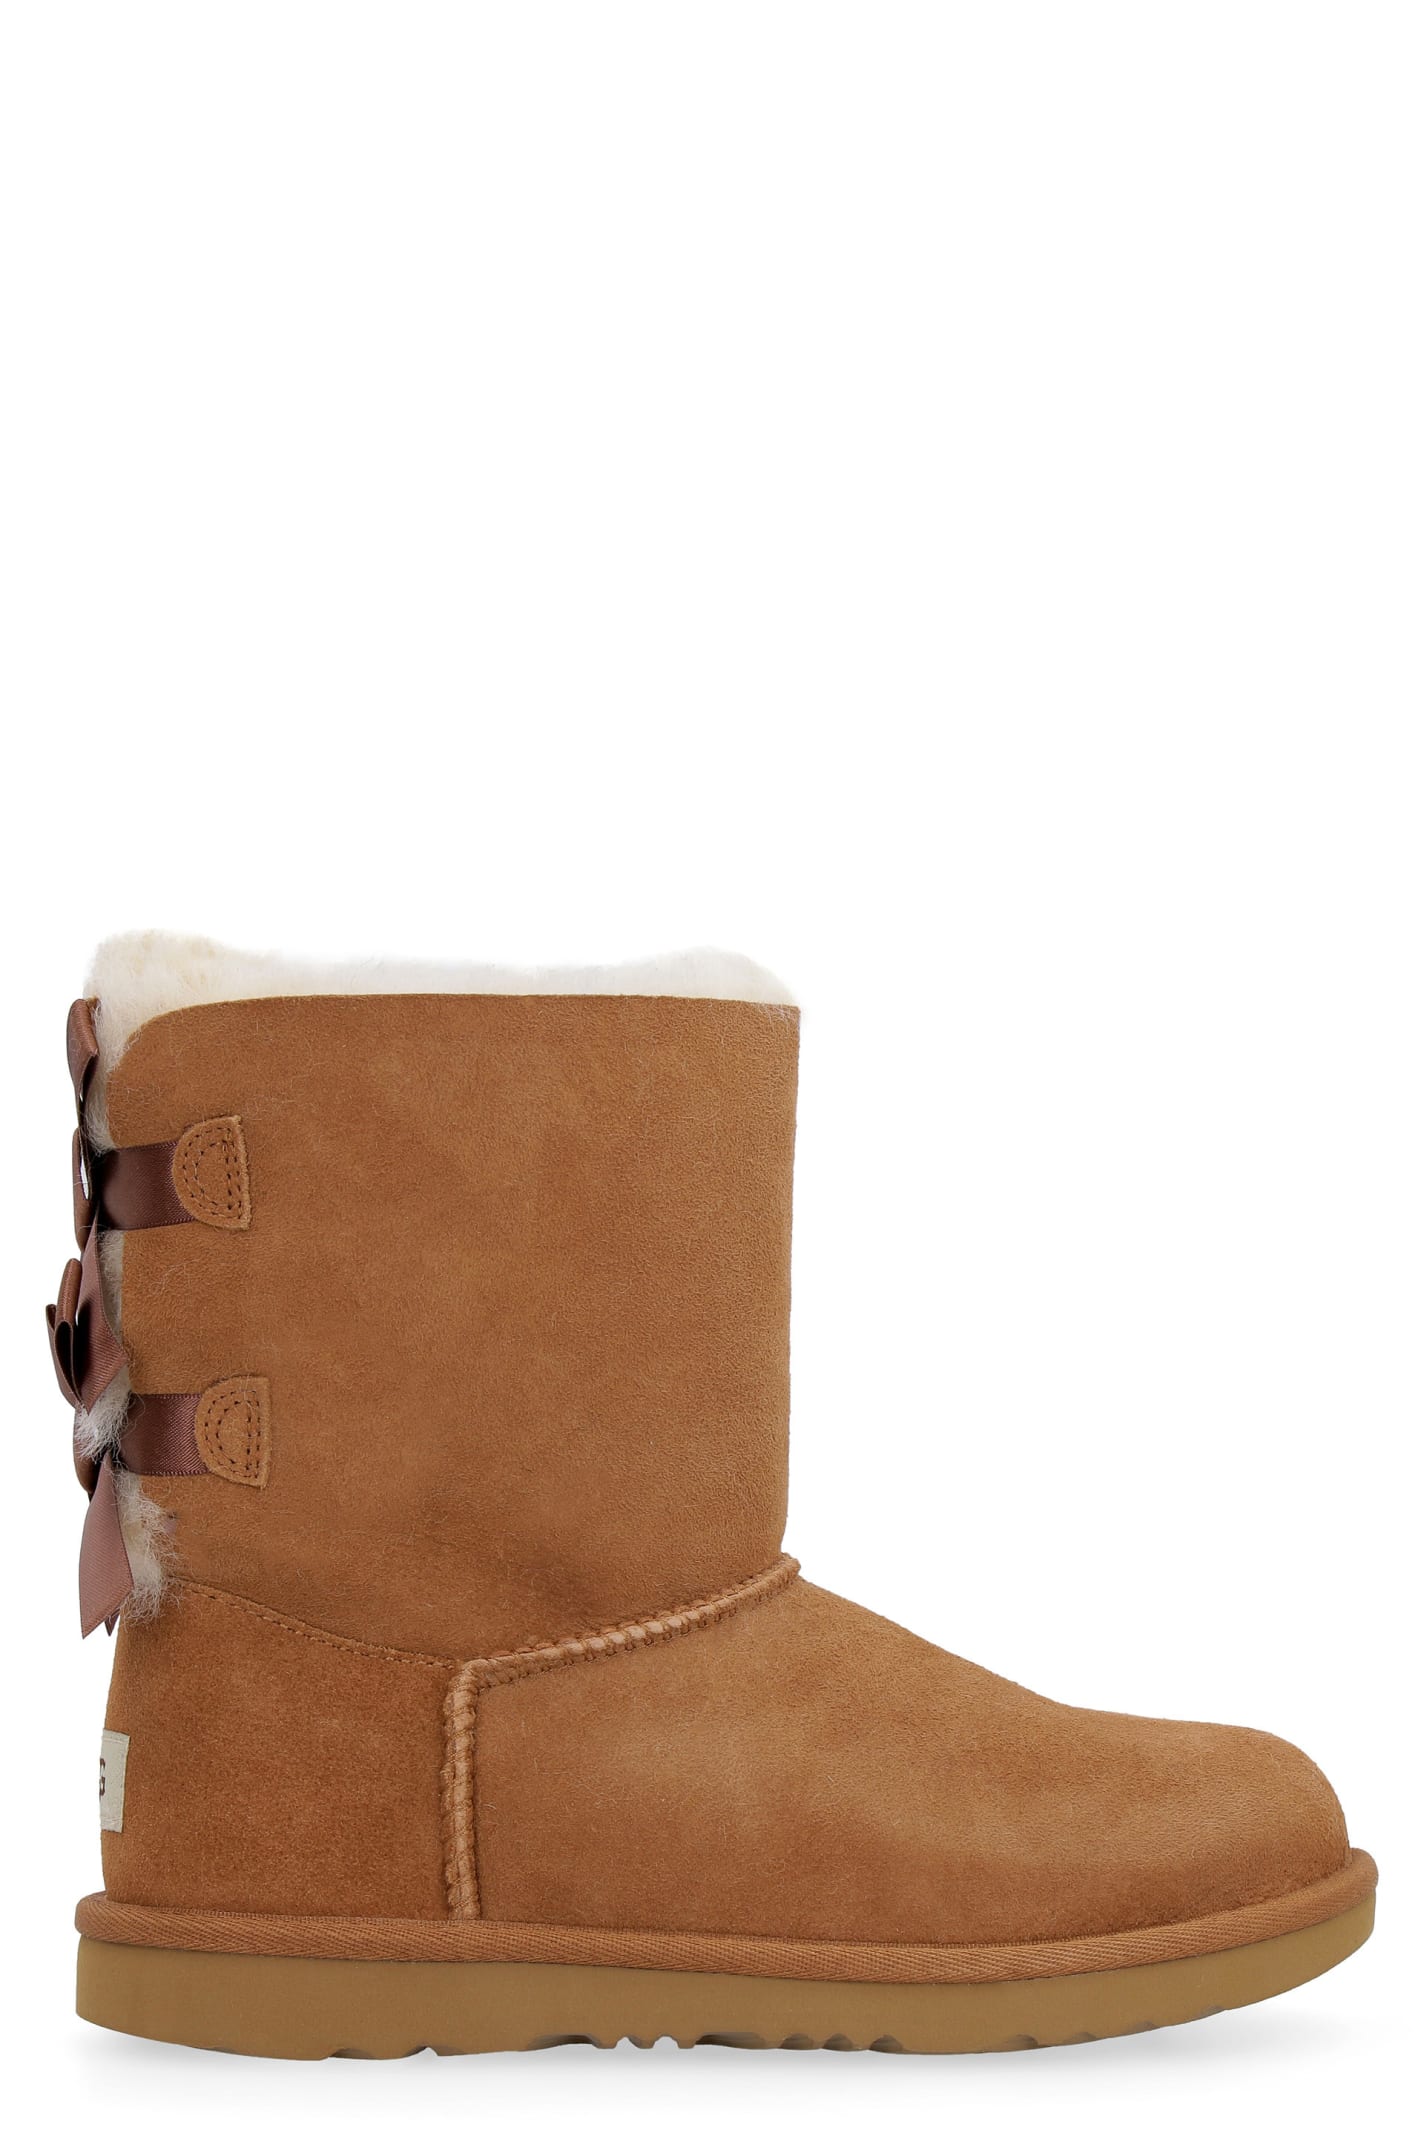 Shop Ugg Bailey Bow Ii Boots In Brown